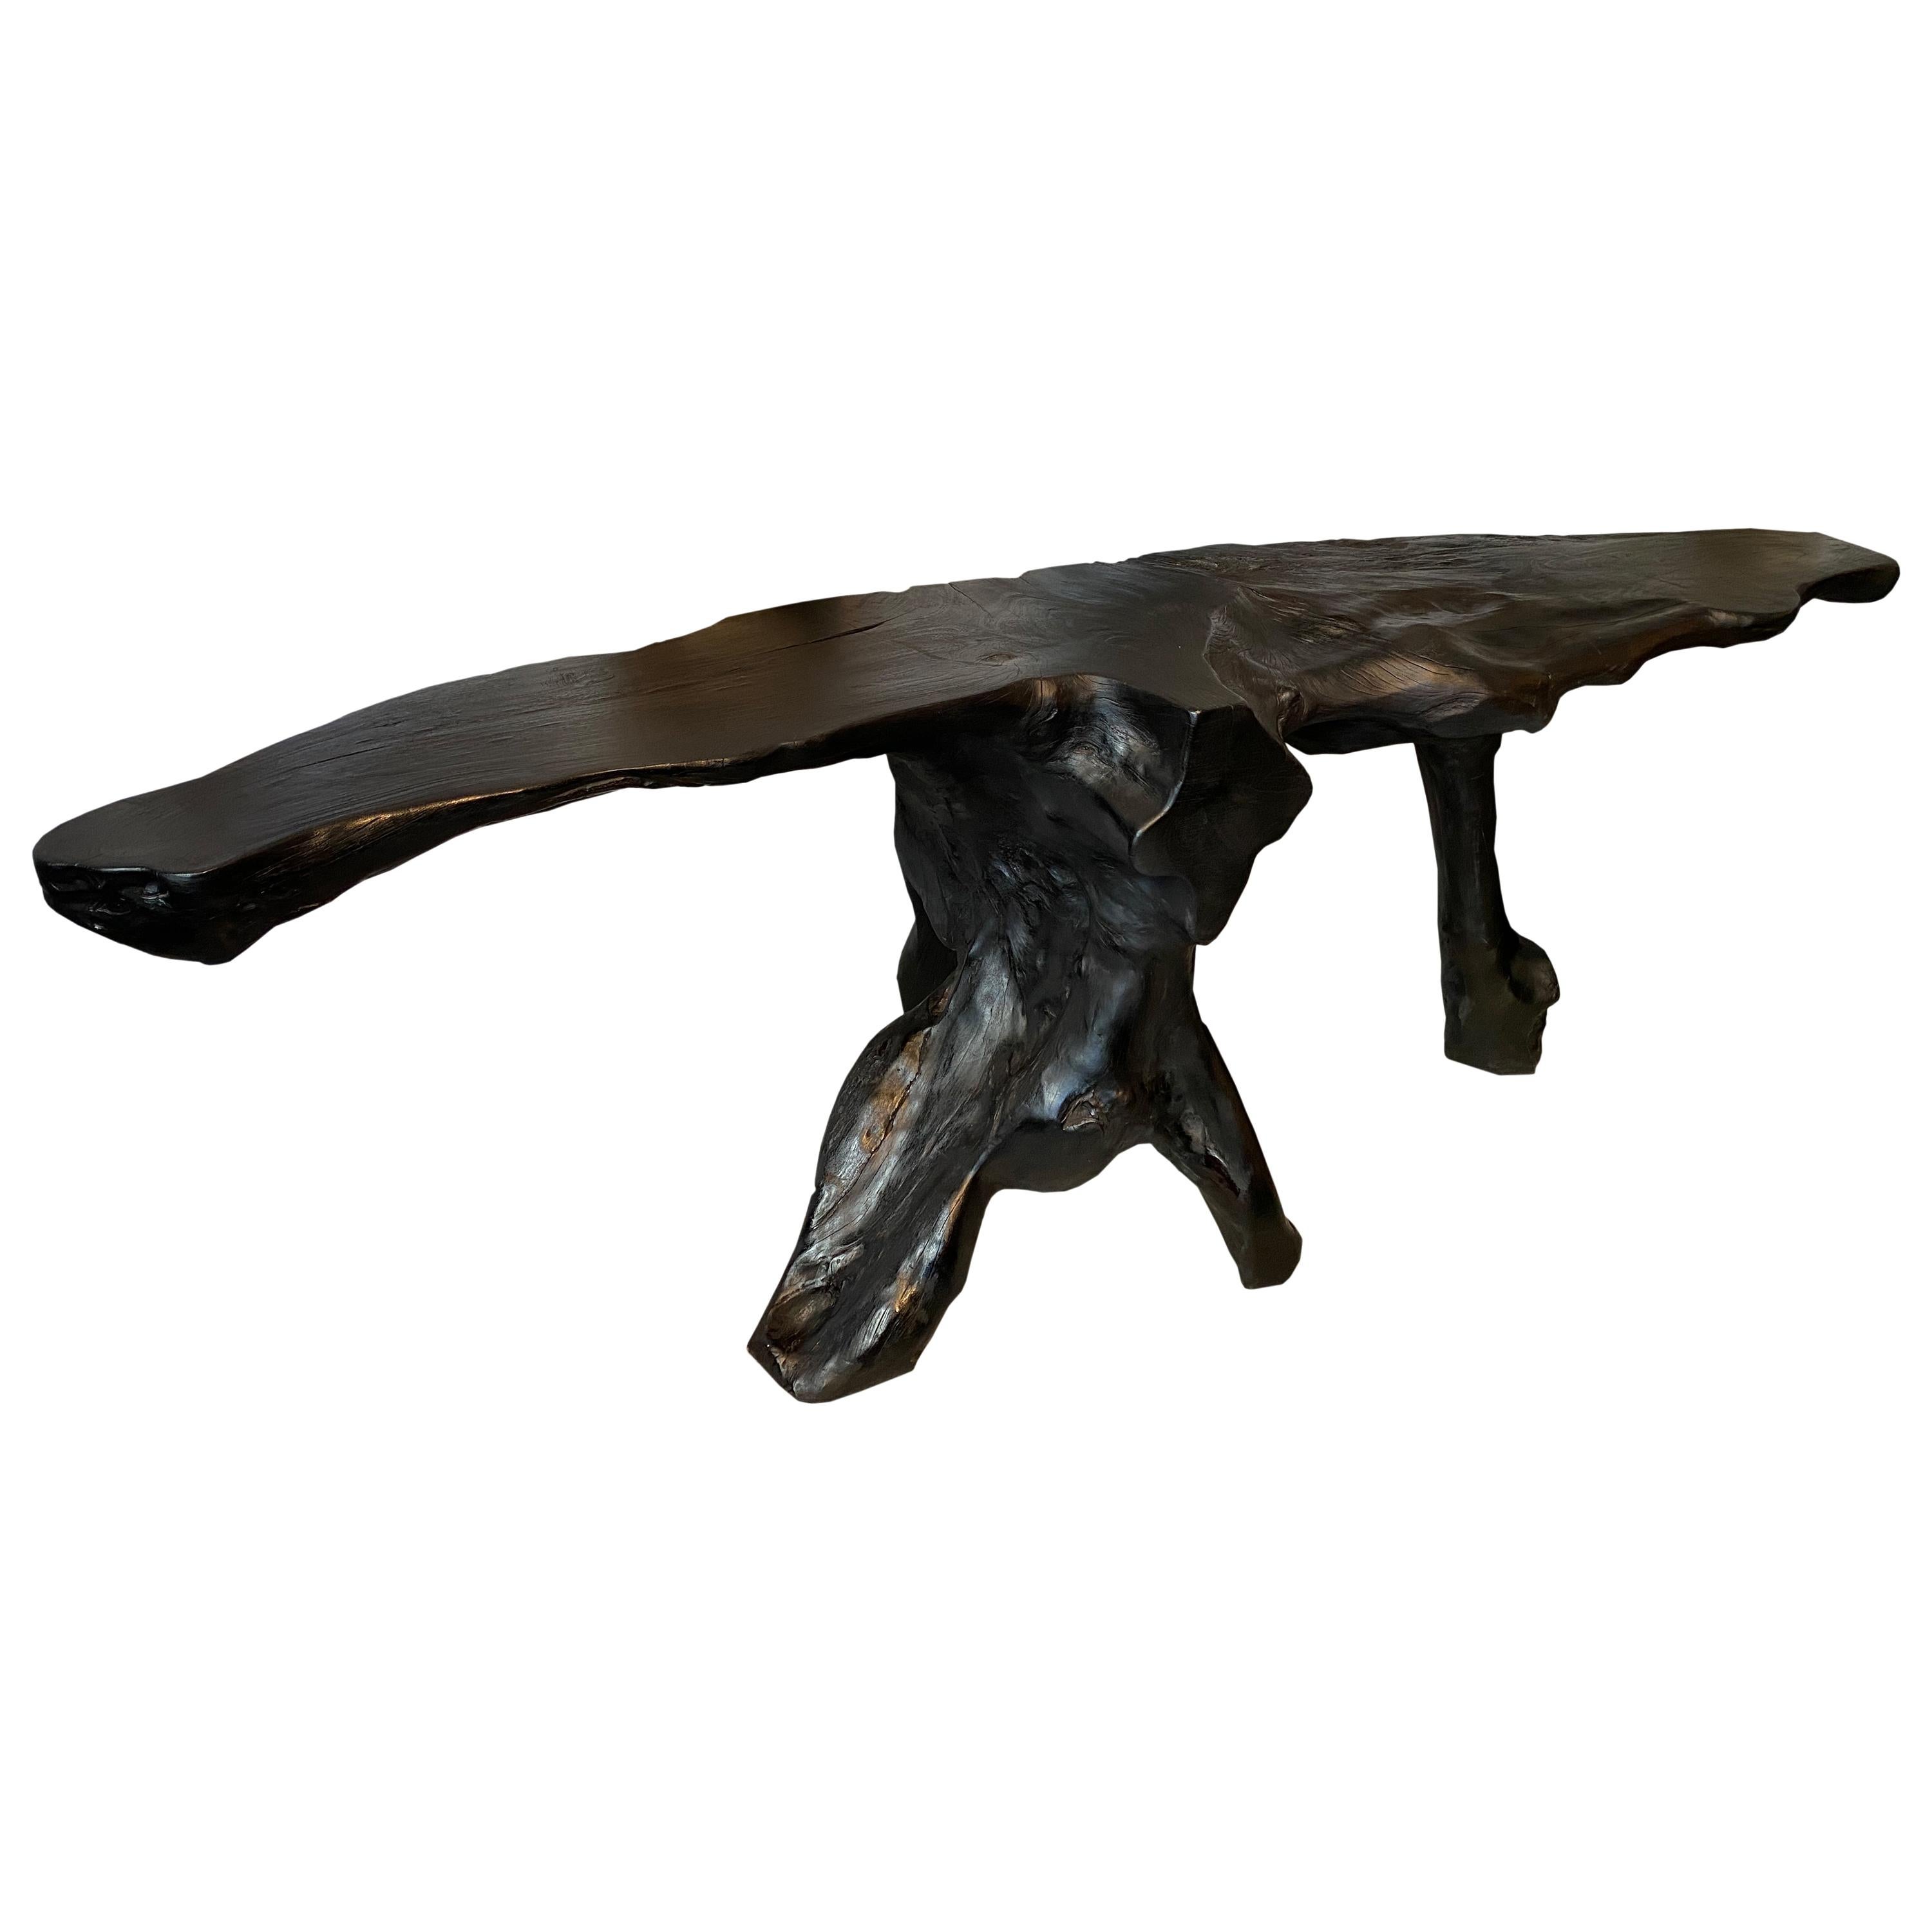 Impressive reclaimed single teak wood root console table charred black. Stunning on both sides. Functions as a console or a piece of art.

The Triple Burnt Collection represents a unique line of modern furniture made from solid organic wood. Burnt